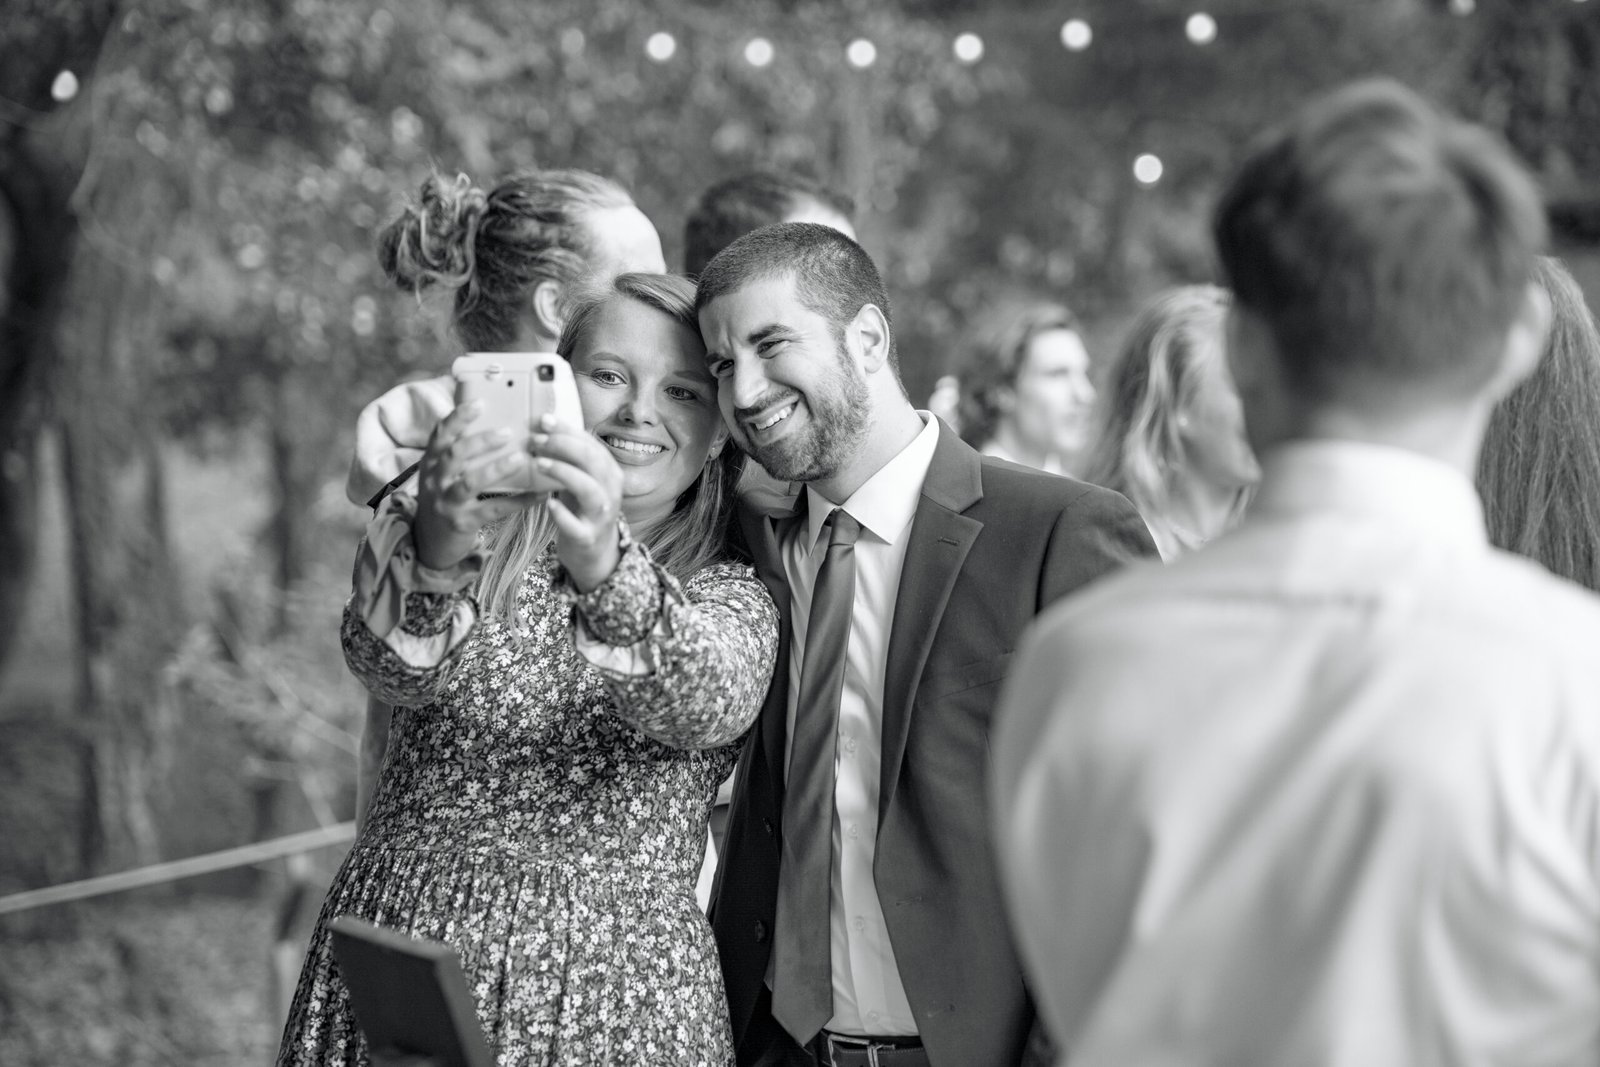 couple taking a selfie with an instant camera during a wedding reception